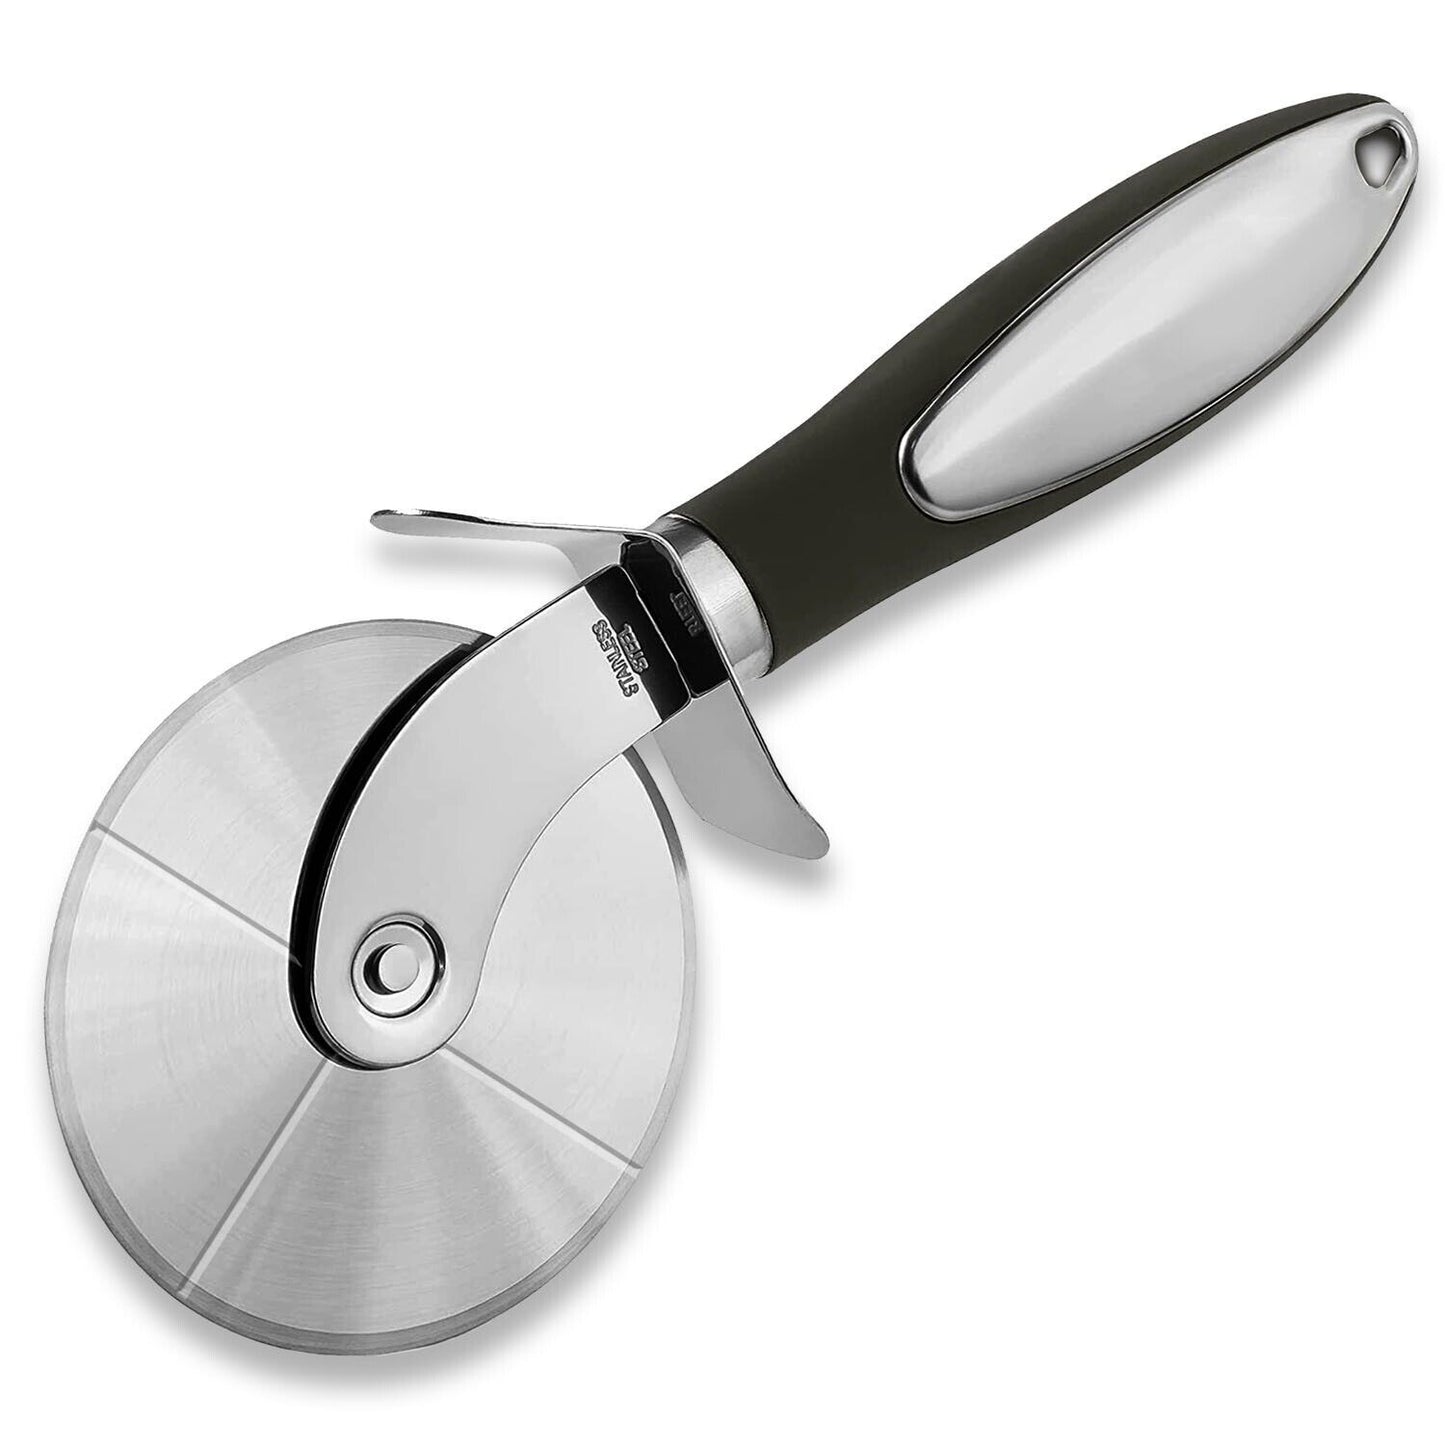 Pizza Cutter Wheel Kitchen Pizza Slicer Cutting Tool Stainless Steel Easy To Cut